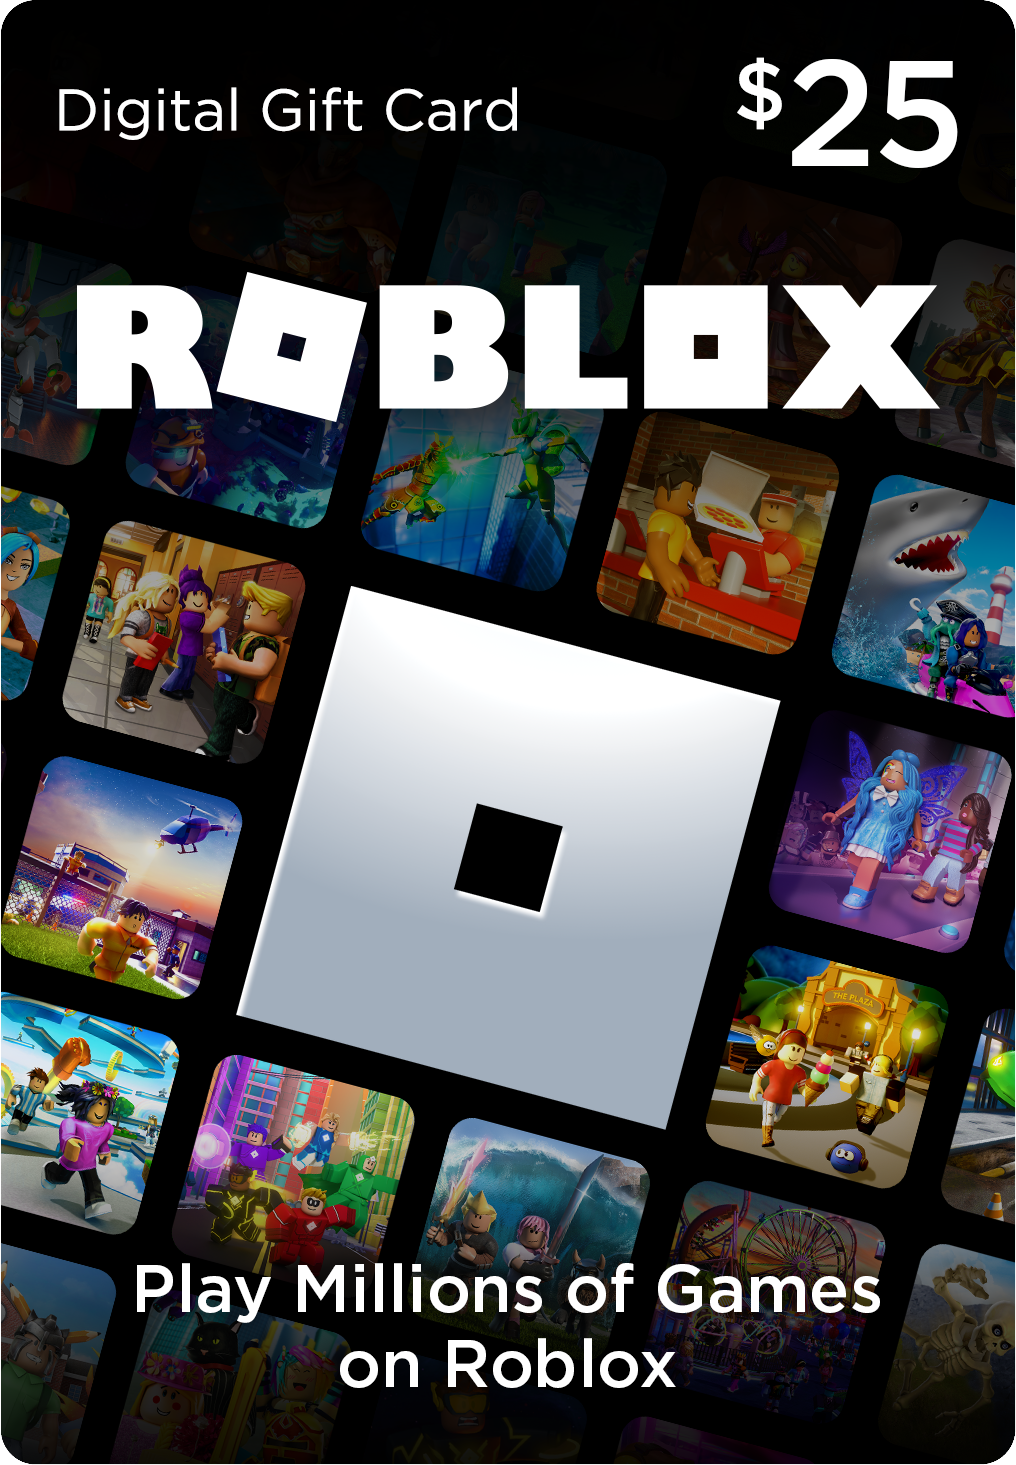 How To Put On Two Hairs On Roblox Ipad 2020